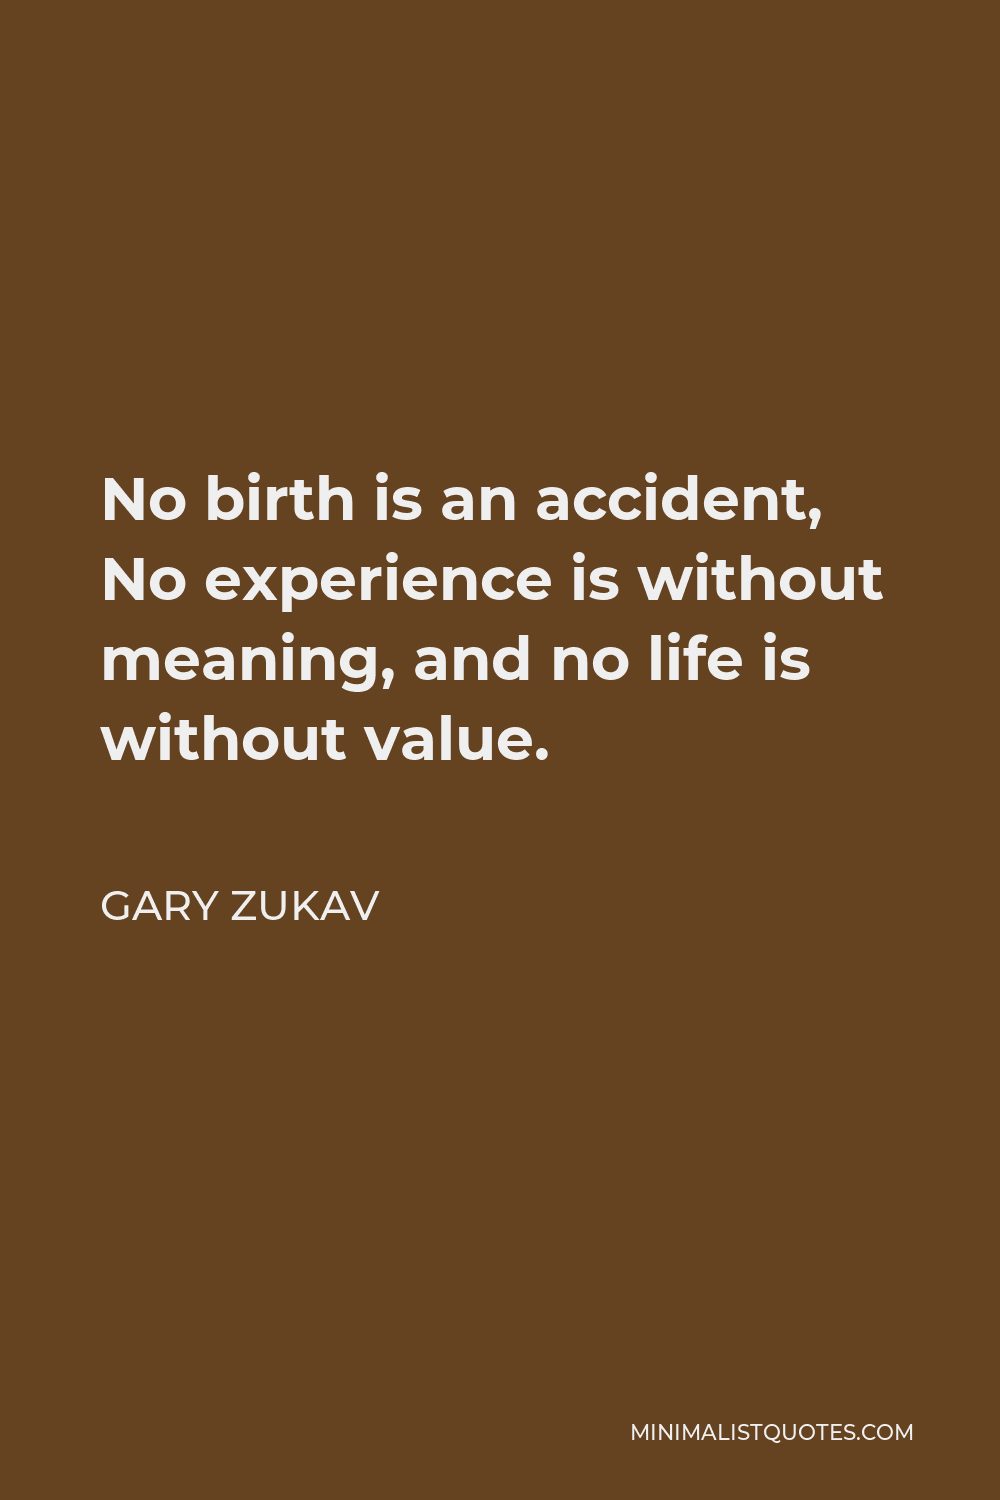 Gary Zukav Quote - No birth is an accident, No experience is without meaning, and no life is without value.